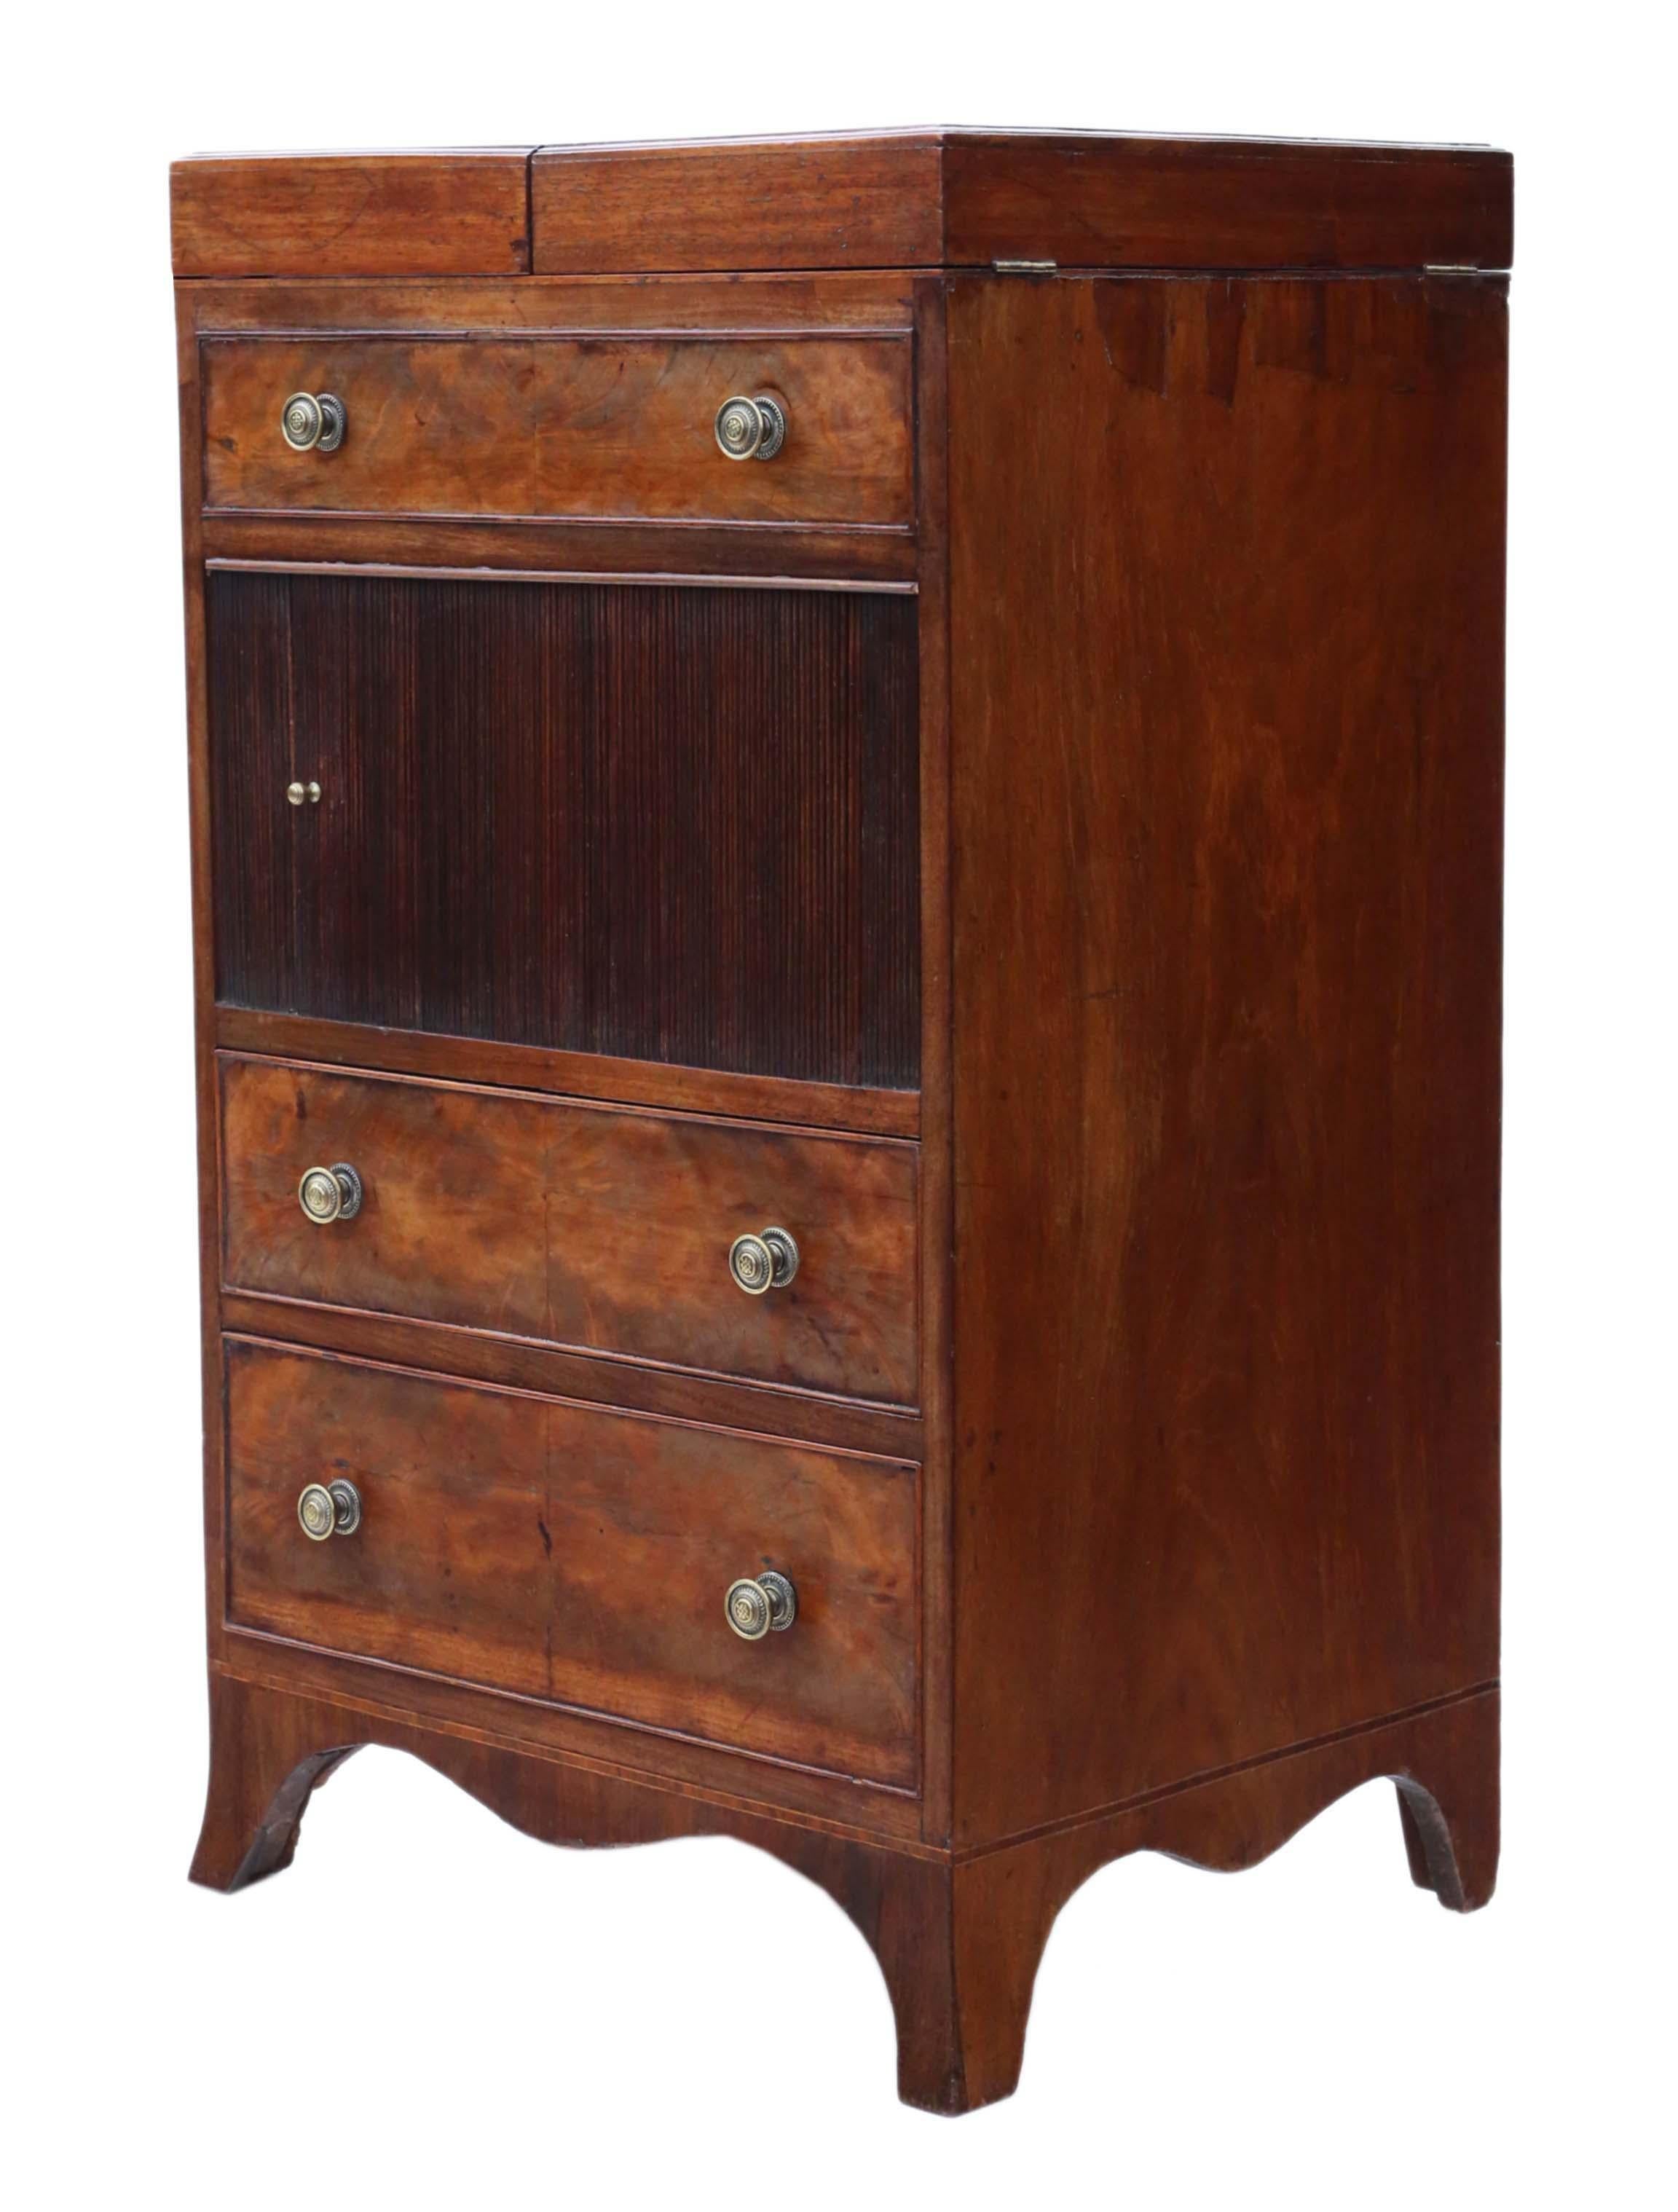 Antique Large Flame Mahogany Washstand Bedside Table, C1800, Georgian 2